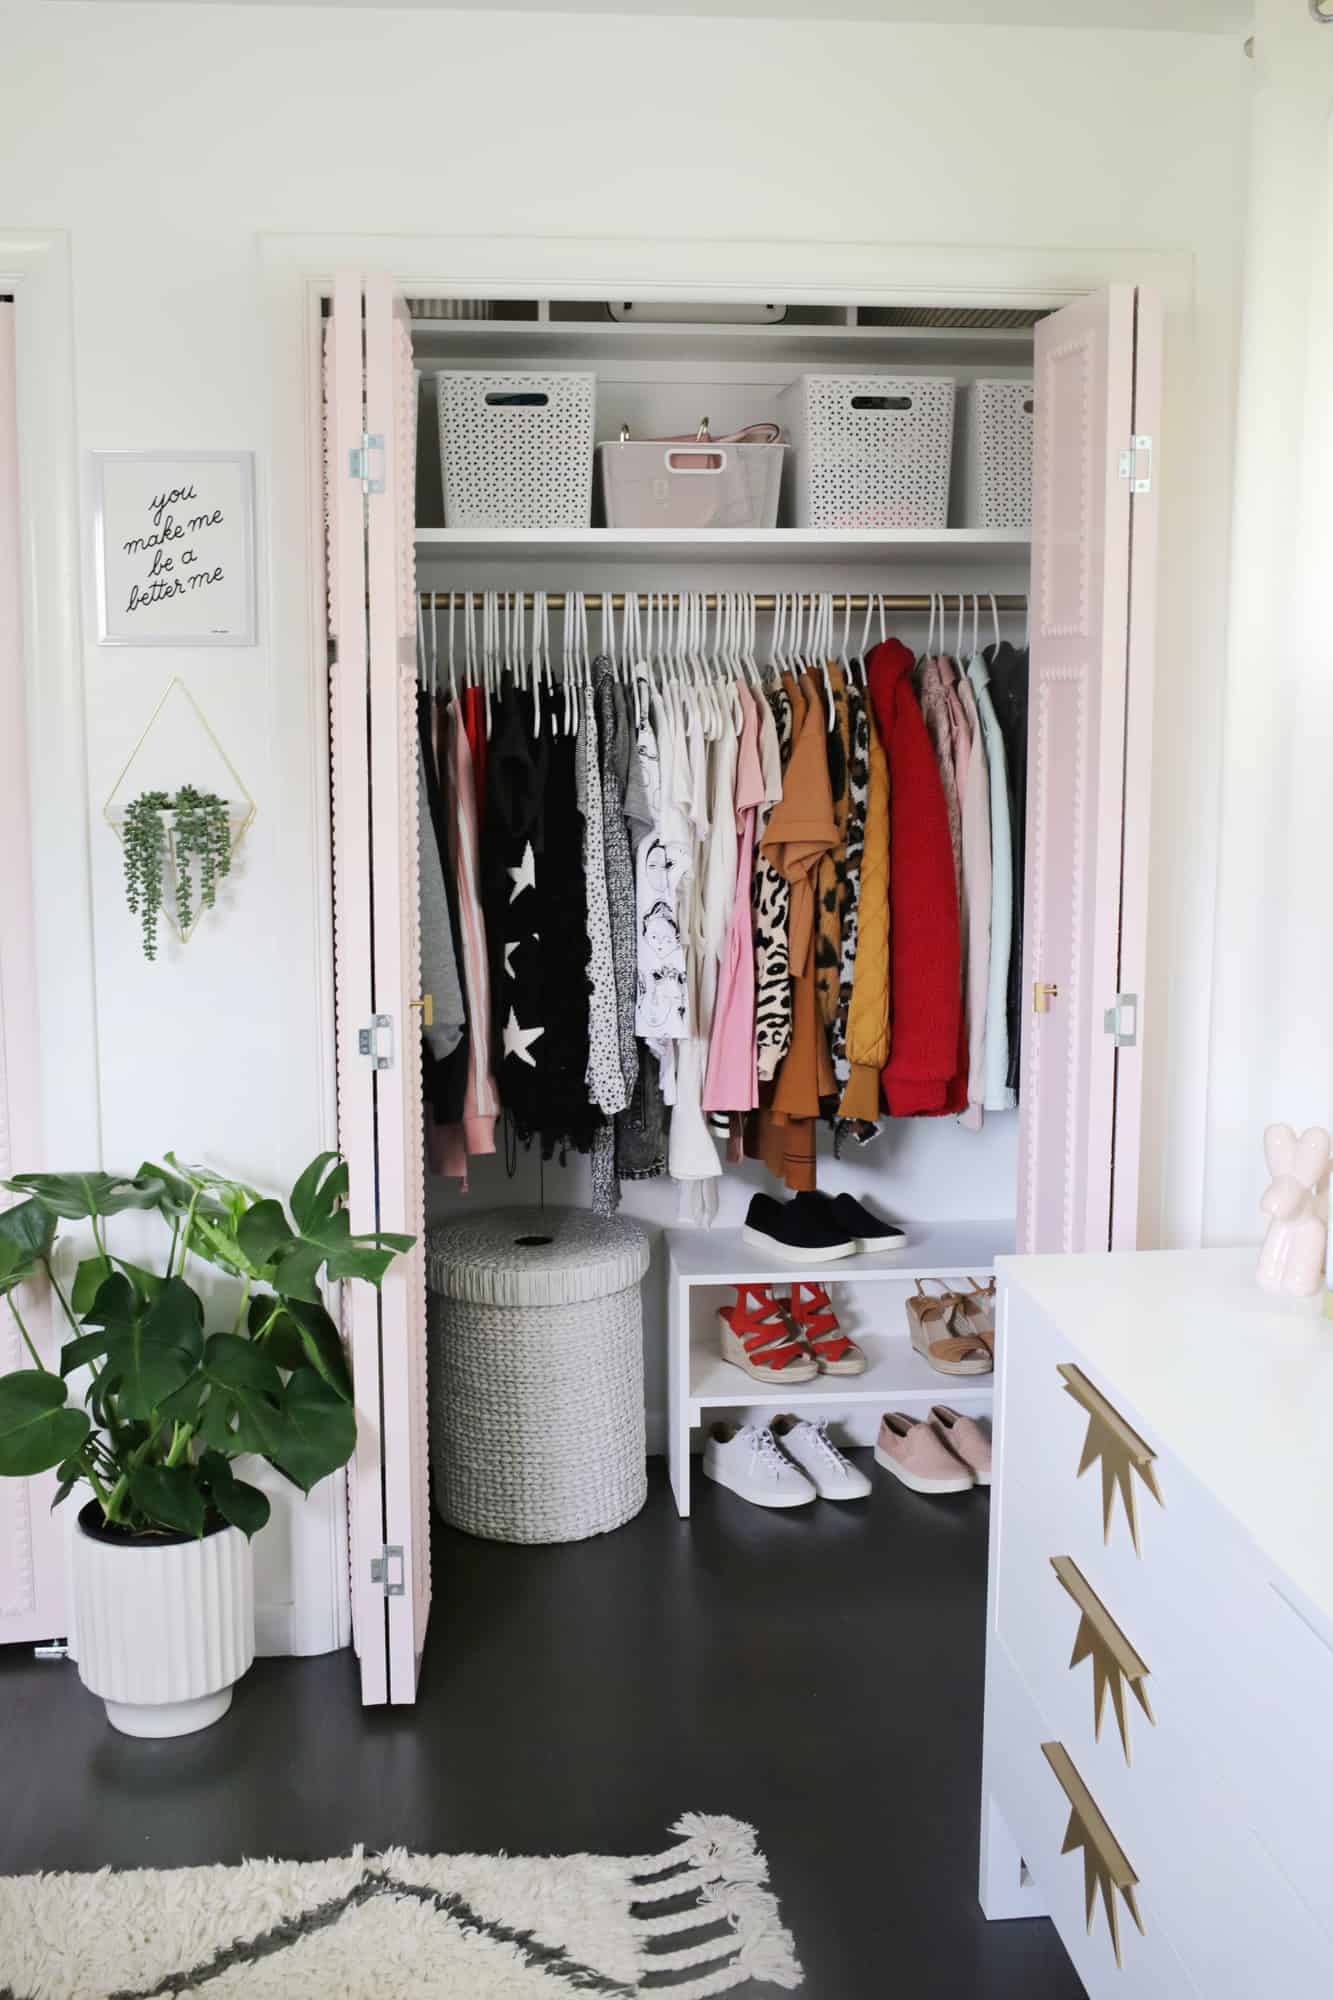 Built-in closet shelving the easy way (step by step tutorial)